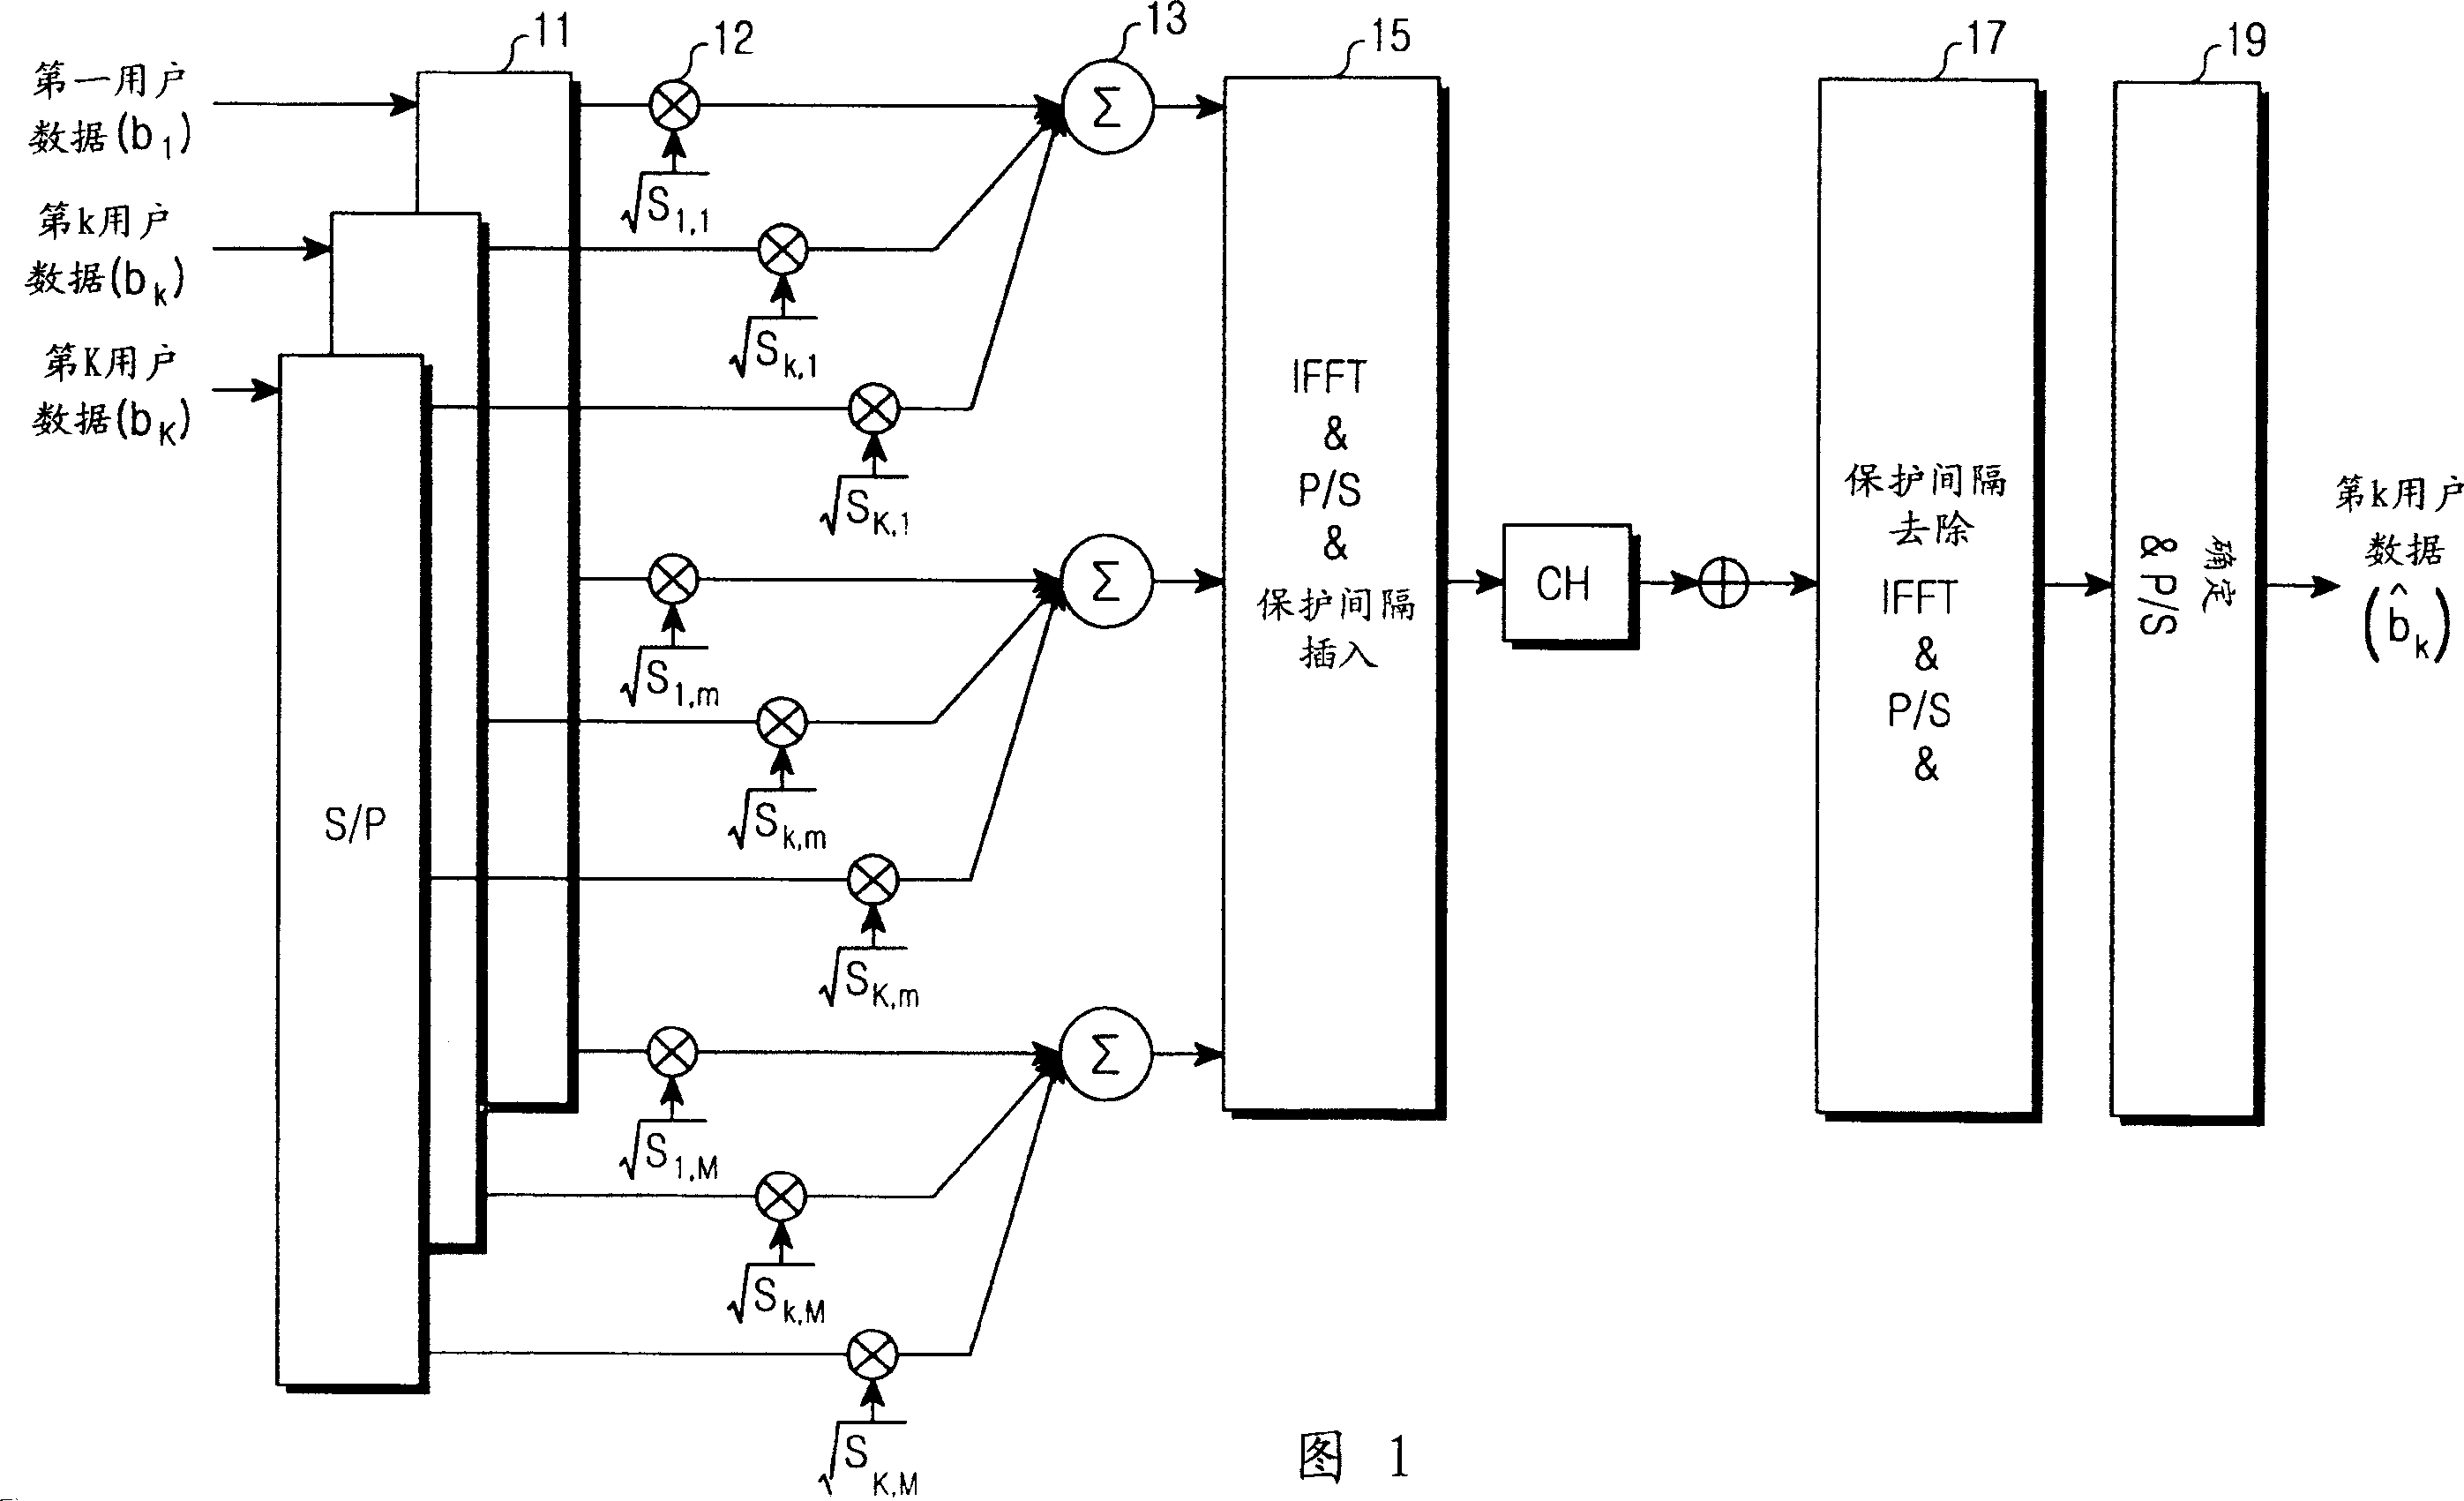 Resource allocation method for downlink transmission in a multicarrier-based CDMA communication system